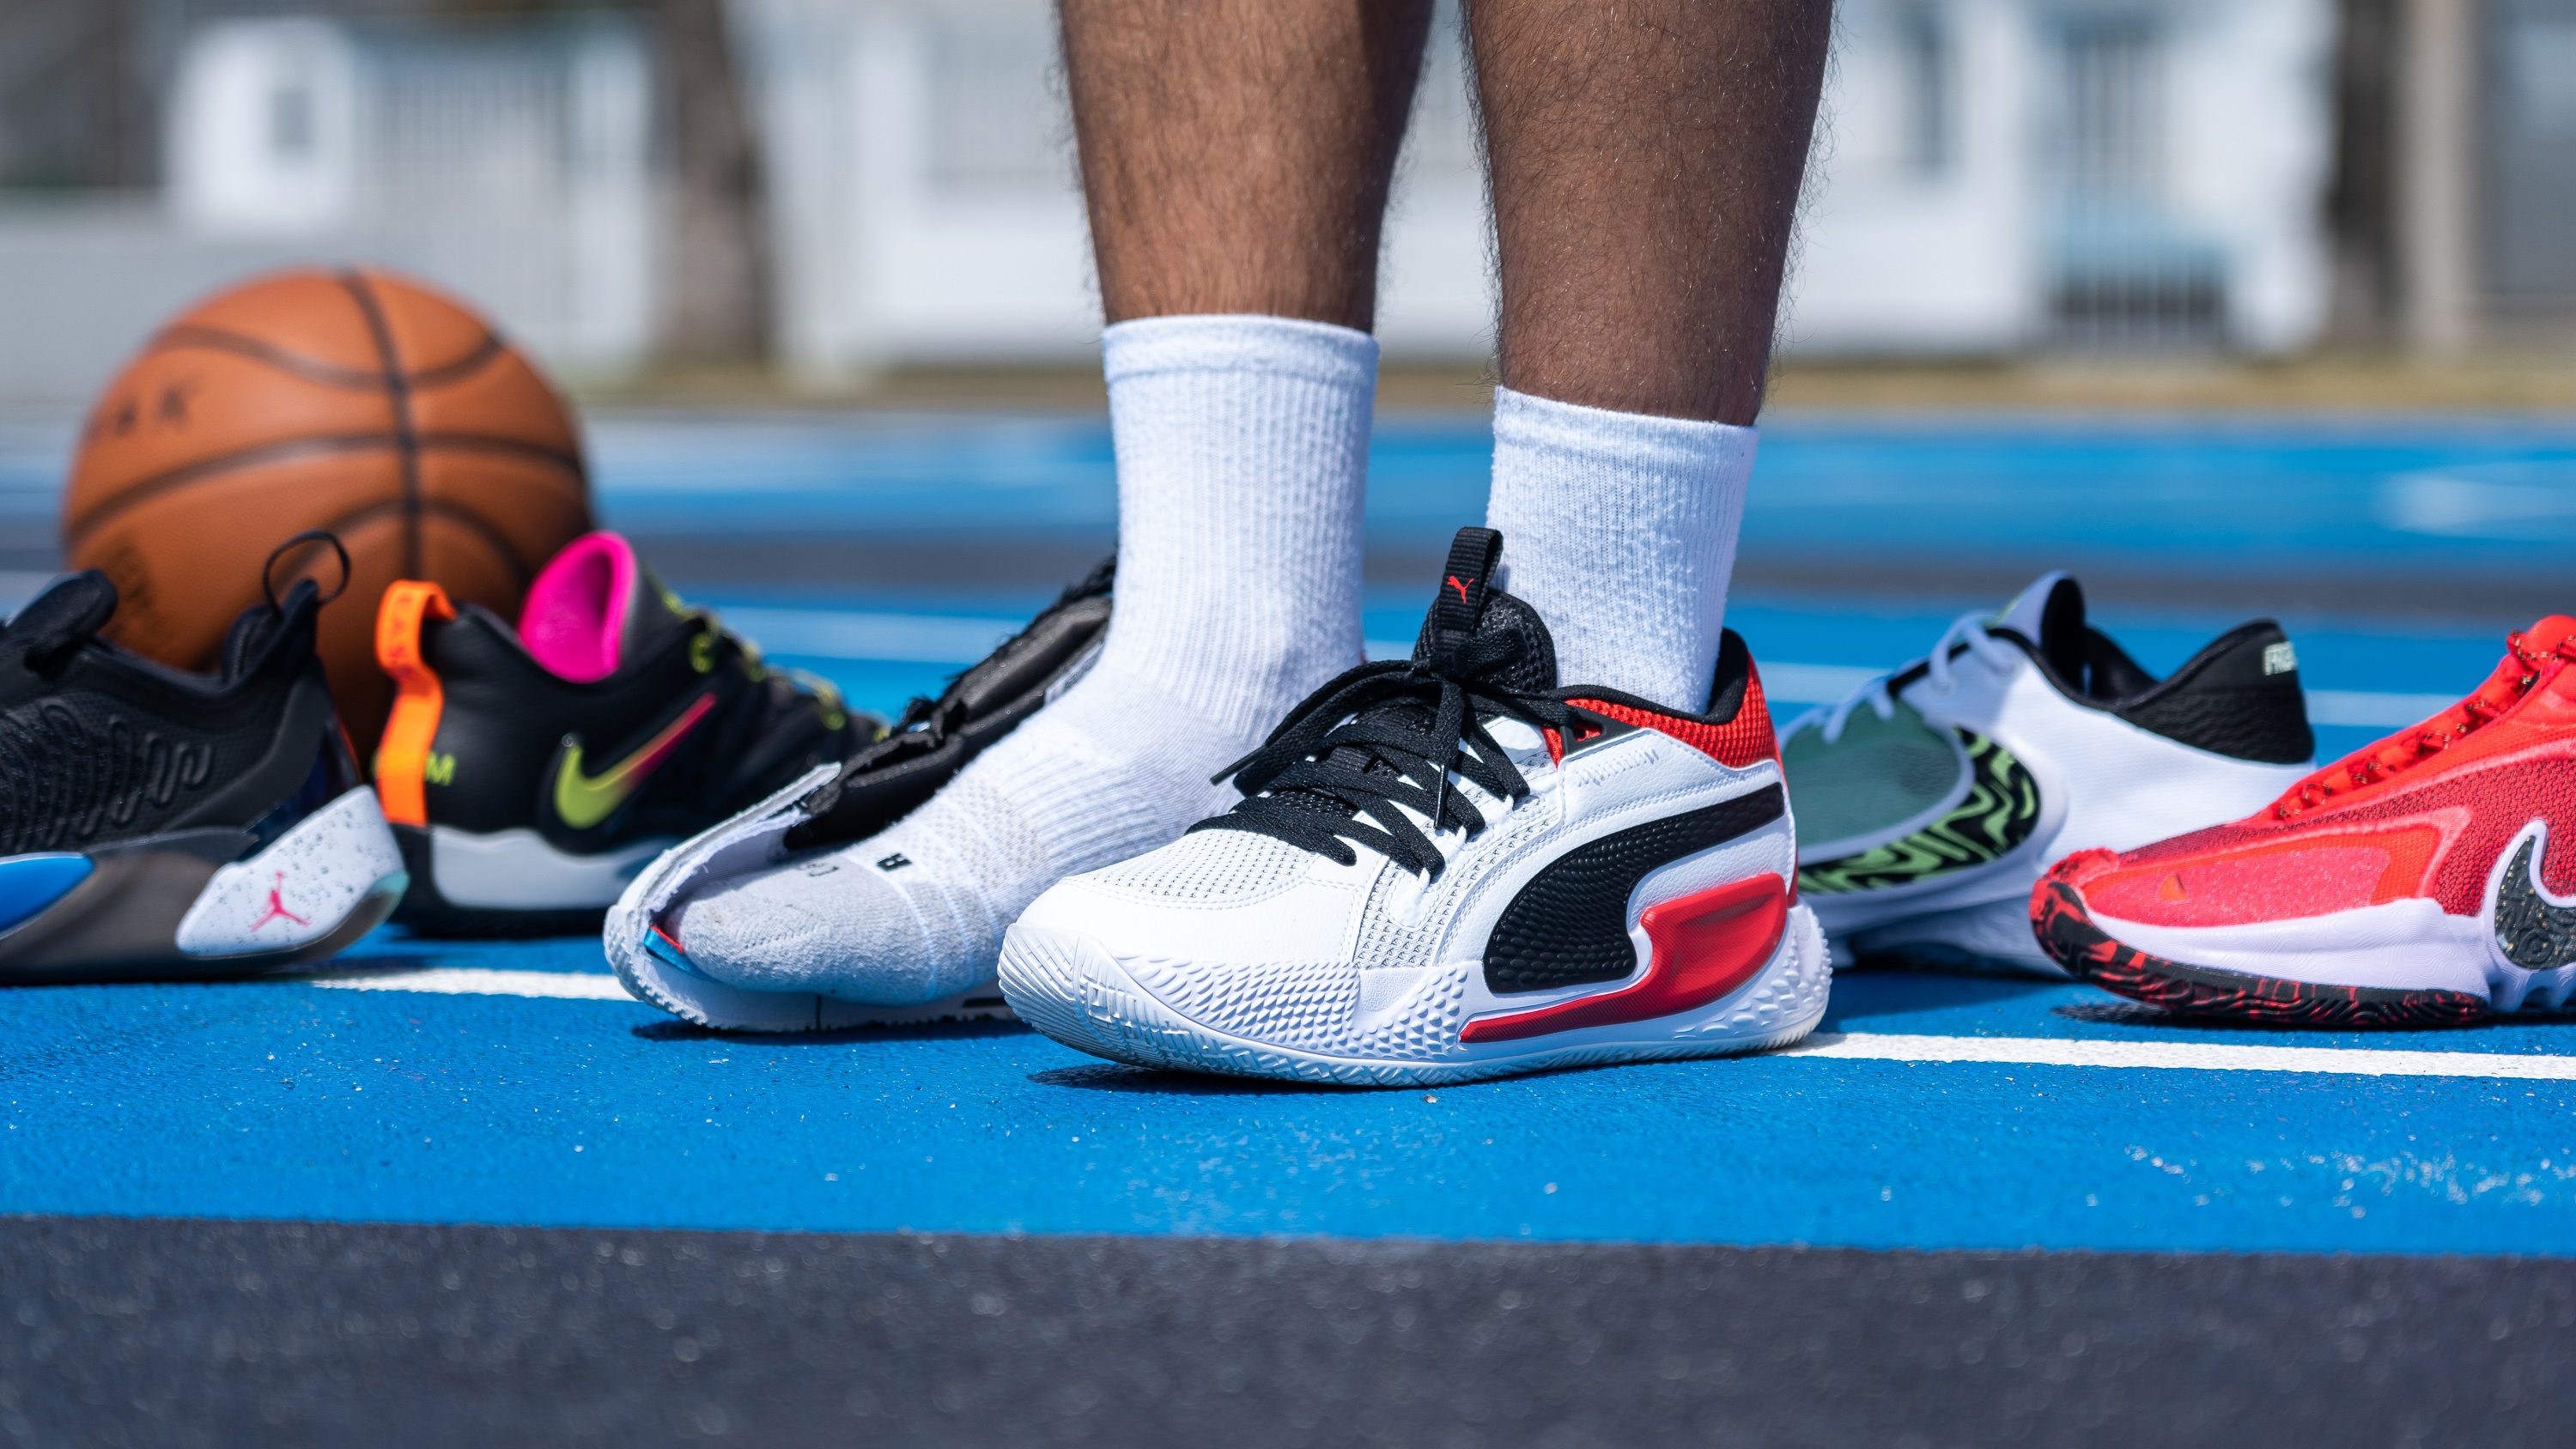 7 Best Low Top Basketball Shoes RunRepeat